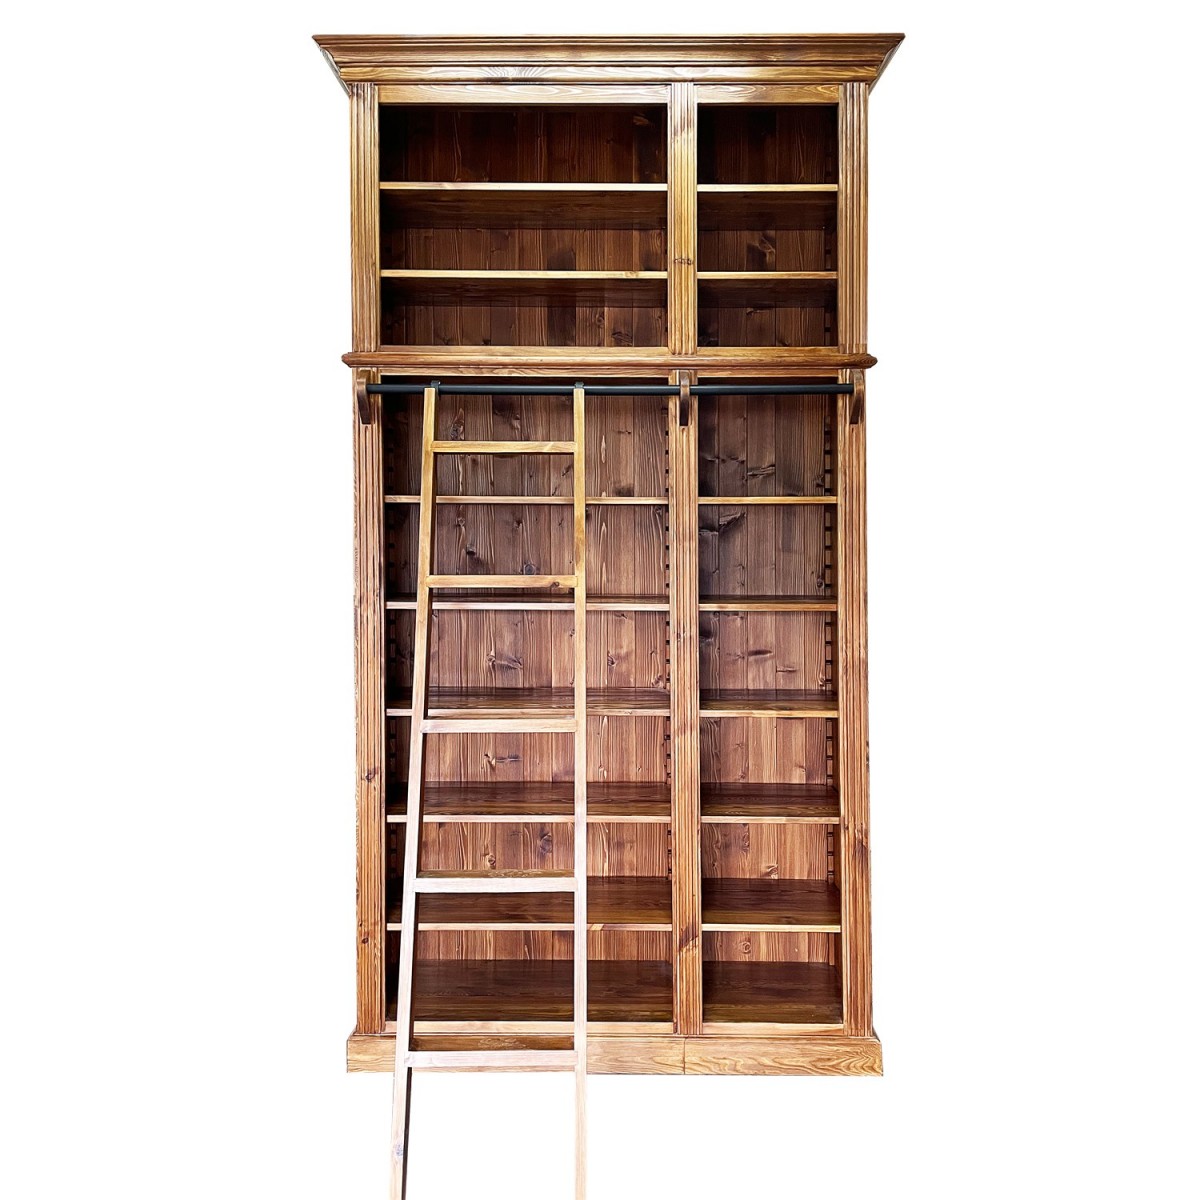 WOODEN BOOKCASE WITH LADDER